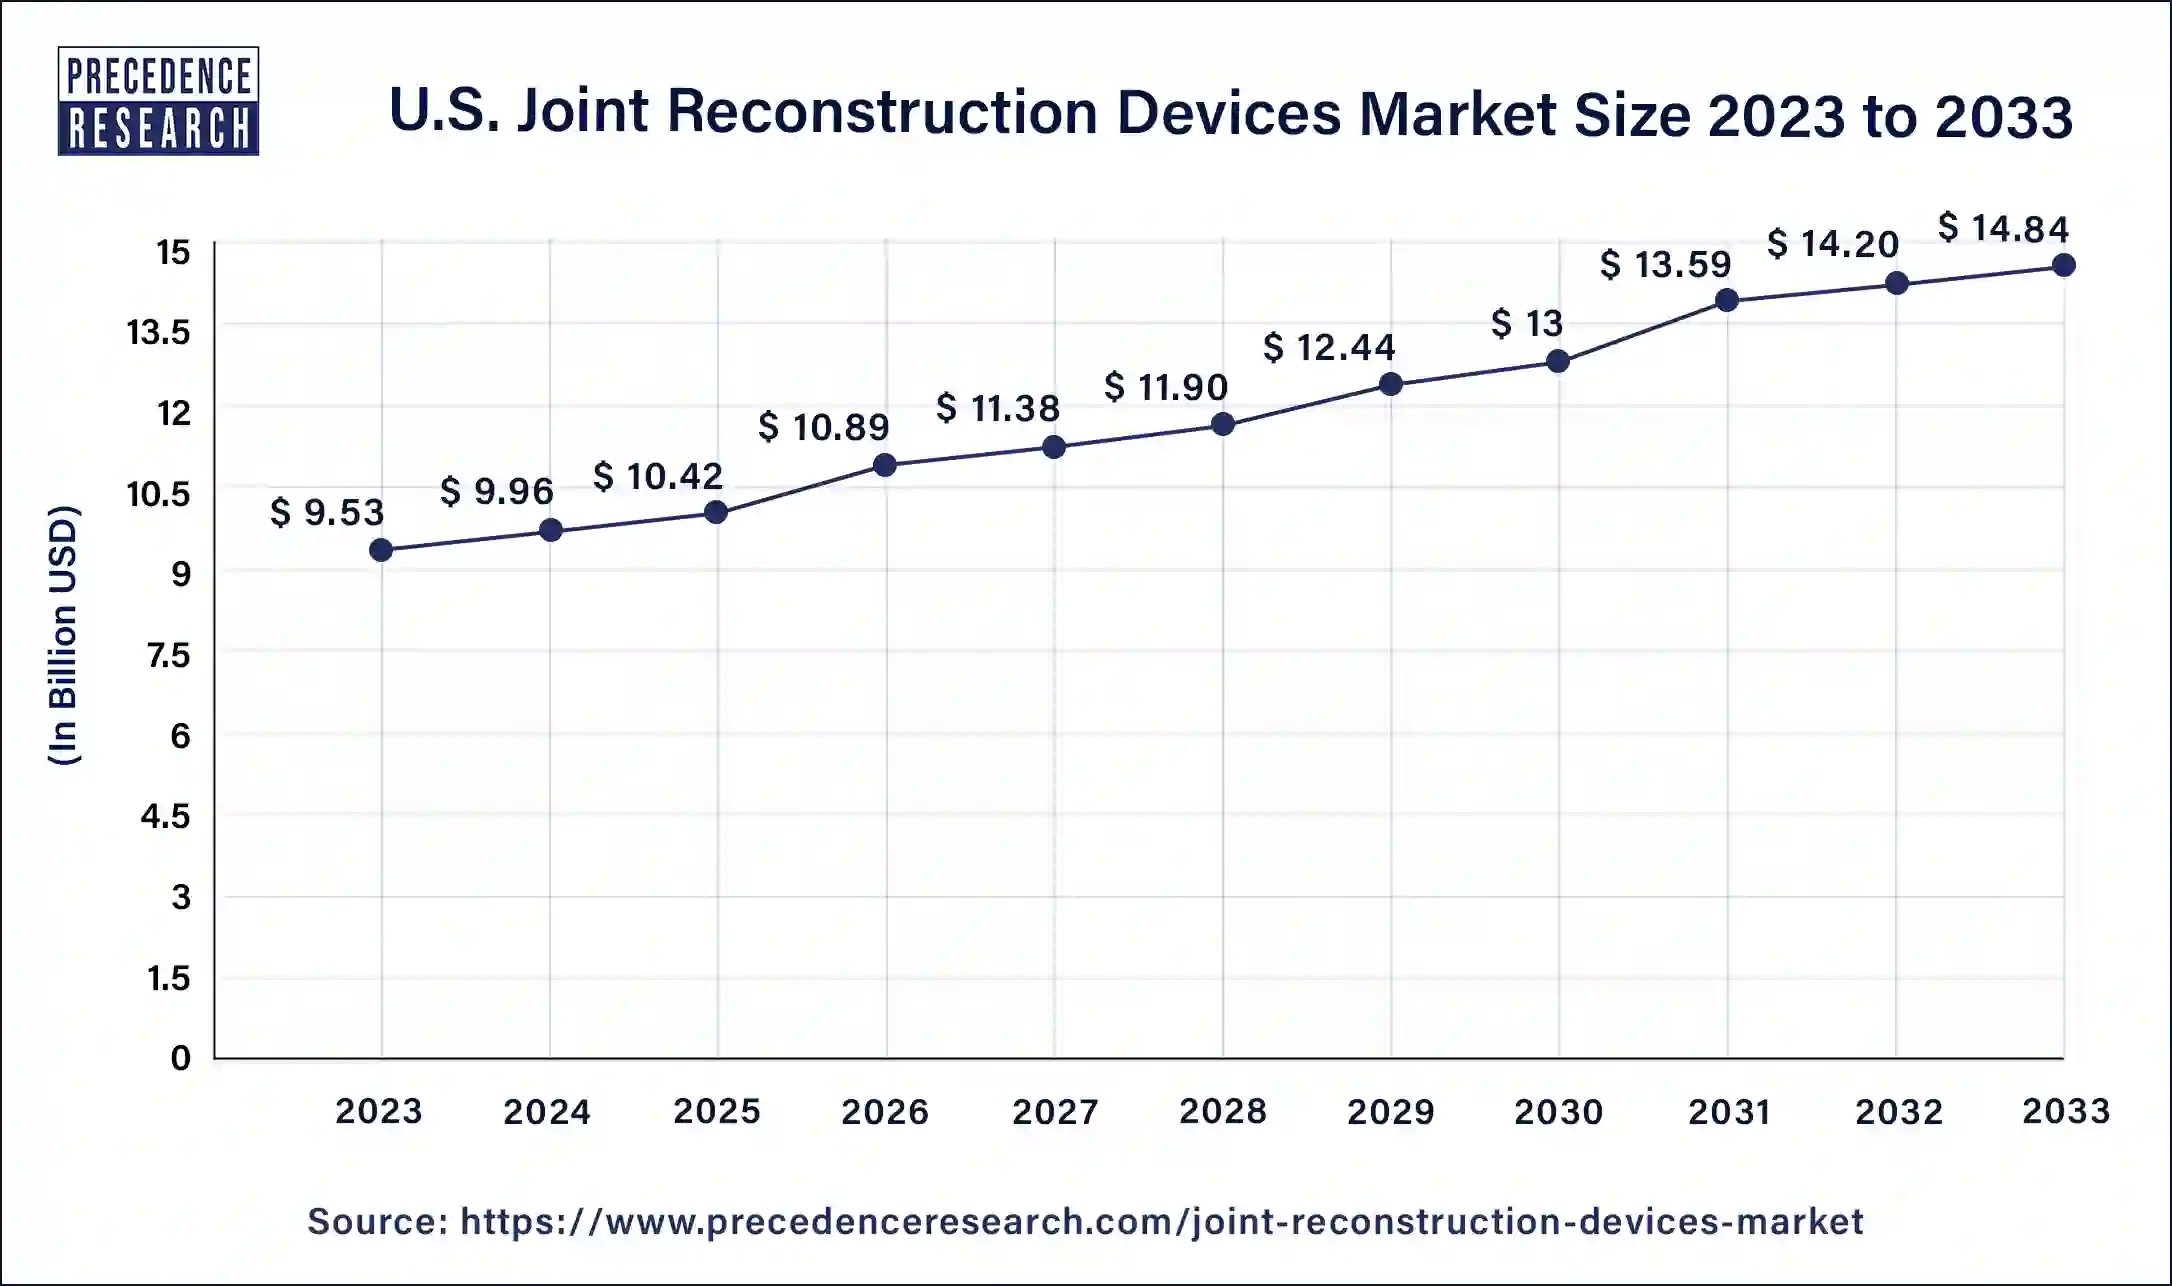 U.S. Joint Reconstruction Devices Market Size 2024 to 2033 